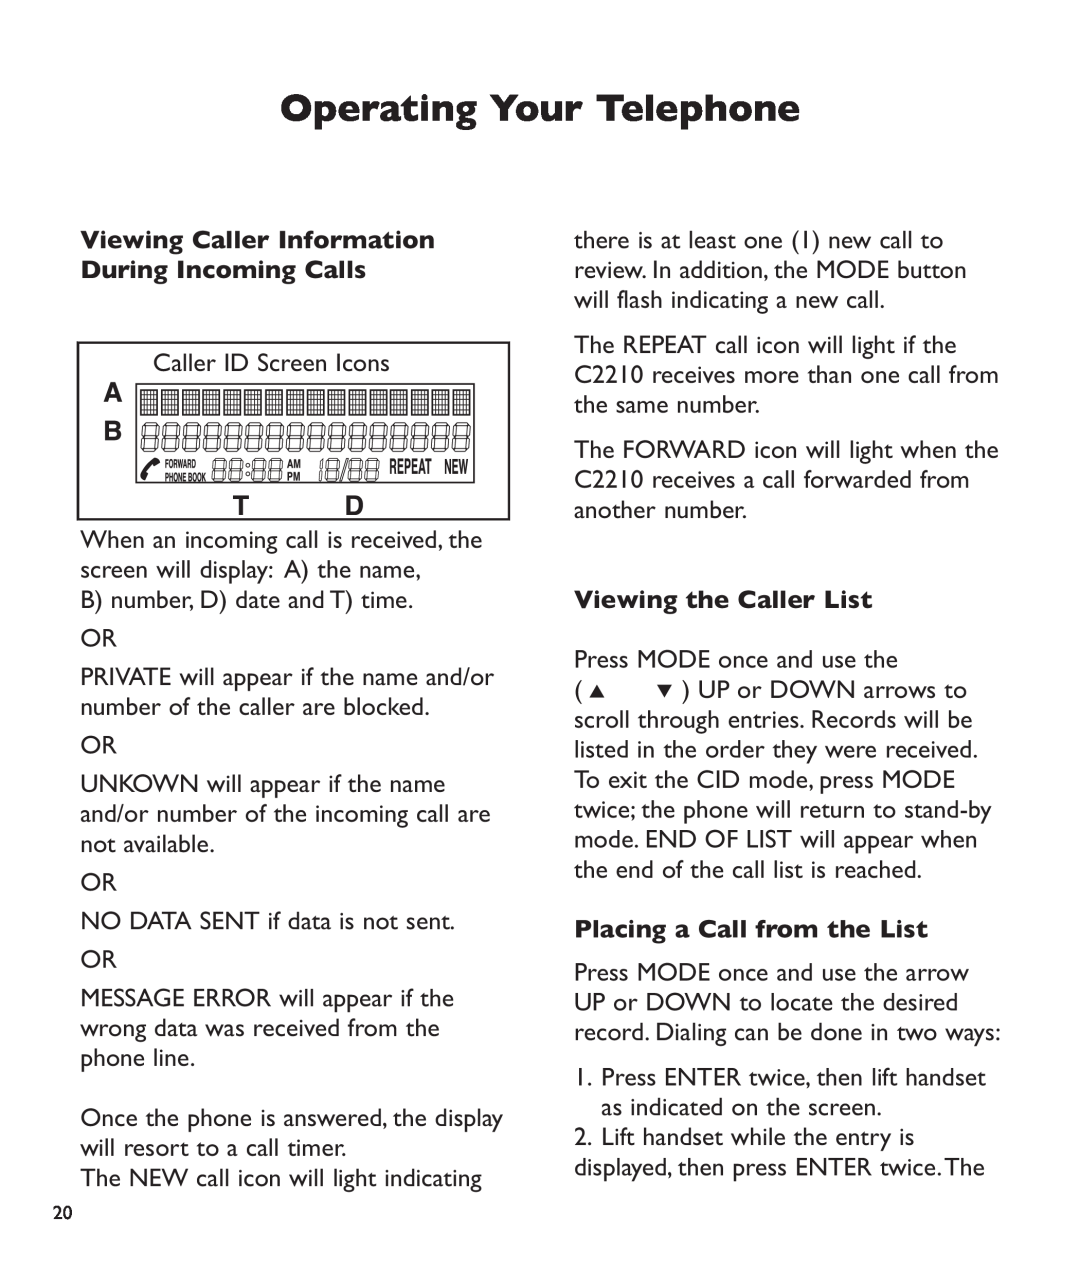 Clarity c2210 Viewing Caller Information During Incoming Calls, Viewing the Caller List, Placing a Call from the List 